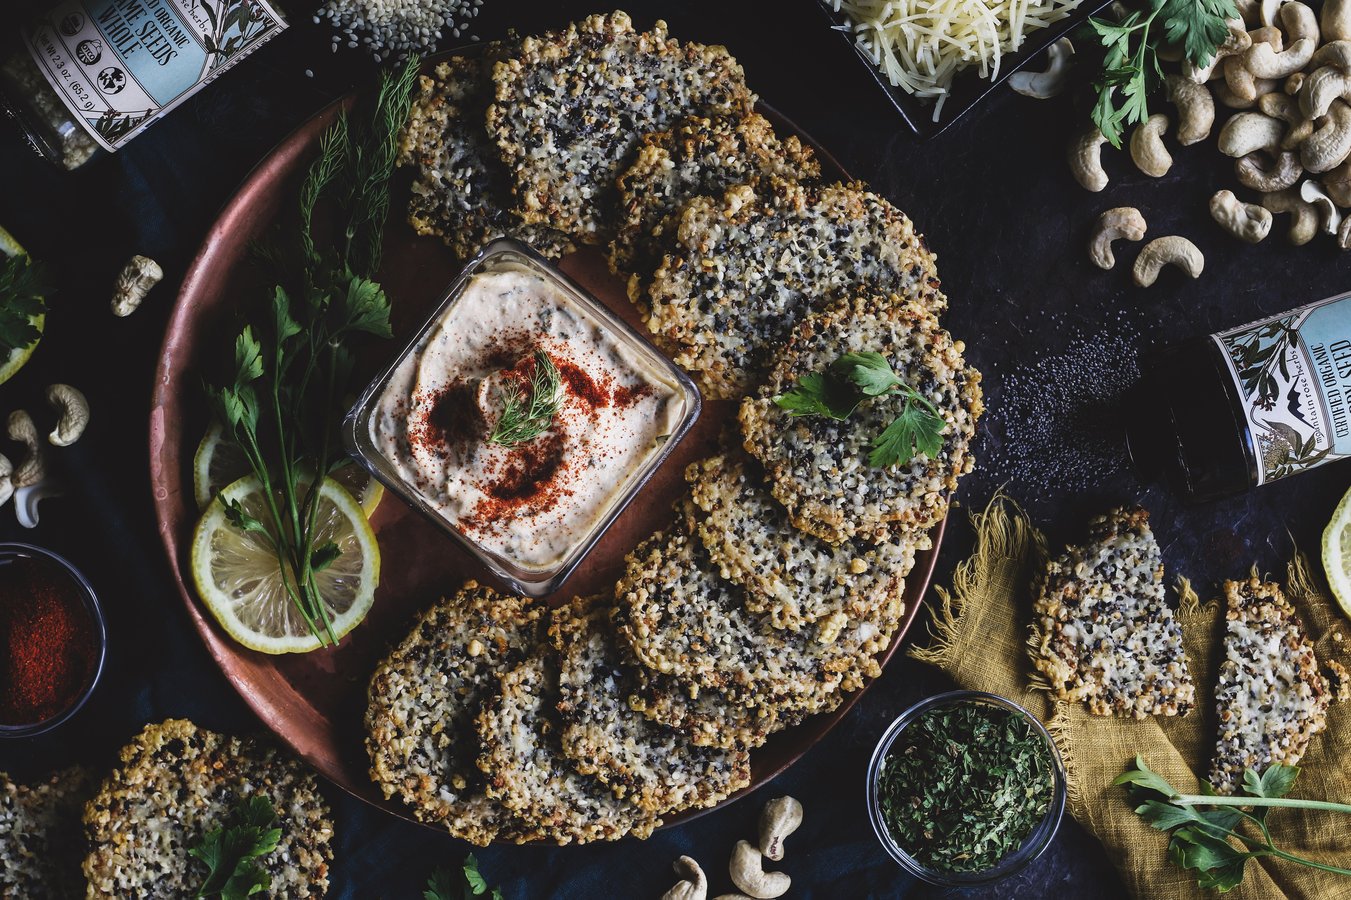 A plate of homemade seed crackers and cashew sour cream herb dip